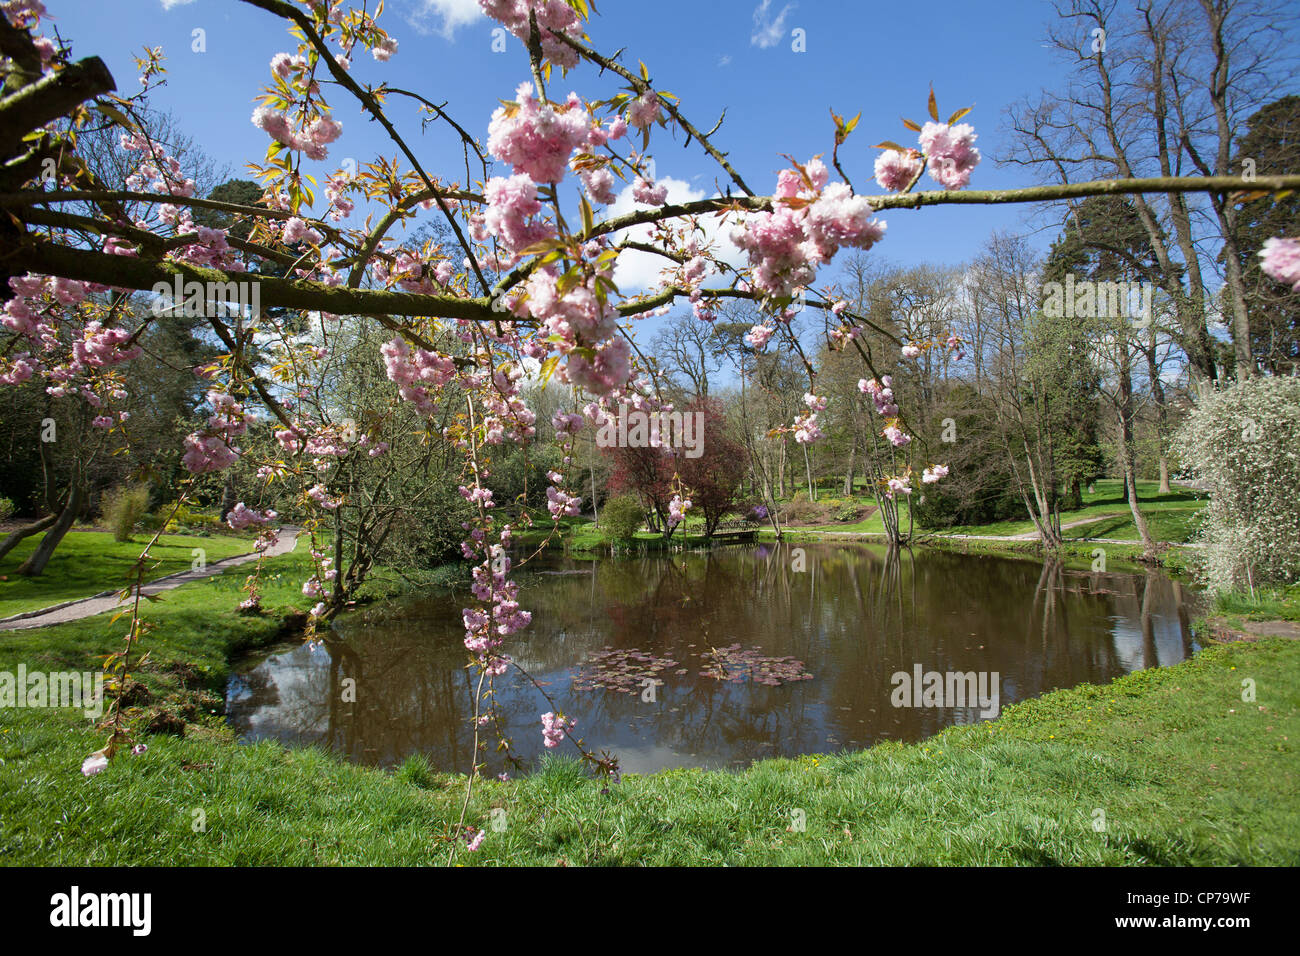 Cholmondeley Castle Gardens. Spring view of a pink cherry blossom tree in full bloom. Stock Photo